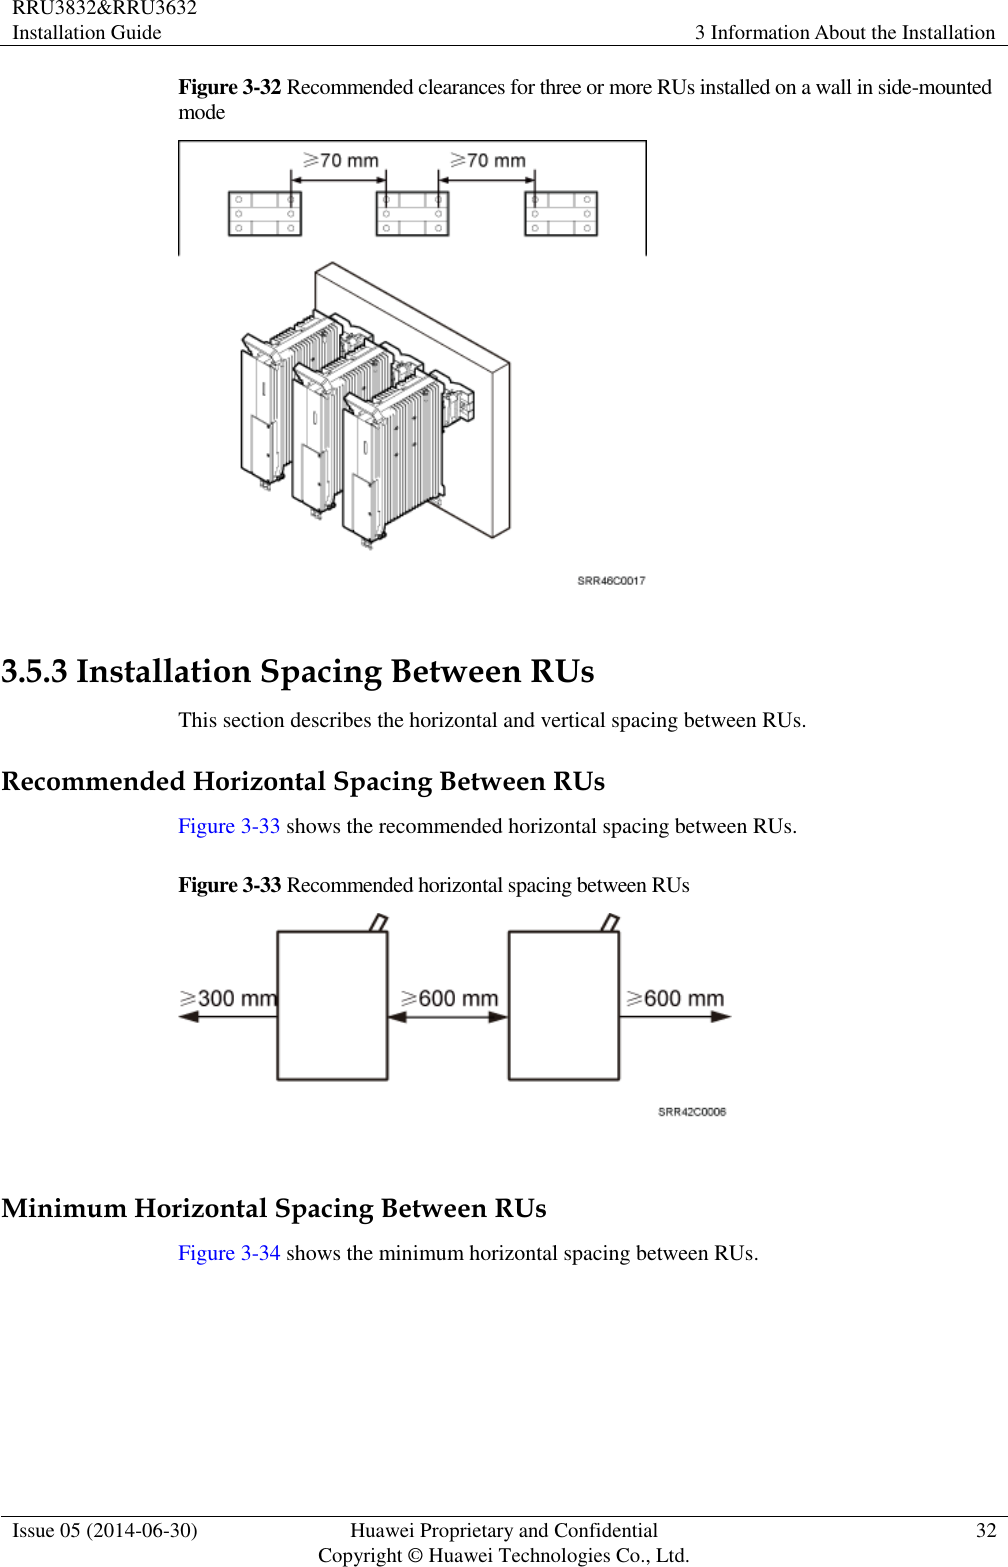 RRU3832&amp;RRU3632 Installation Guide 3 Information About the Installation  Issue 05 (2014-06-30) Huawei Proprietary and Confidential                                     Copyright © Huawei Technologies Co., Ltd. 32  Figure 3-32 Recommended clearances for three or more RUs installed on a wall in side-mounted mode   3.5.3 Installation Spacing Between RUs This section describes the horizontal and vertical spacing between RUs. Recommended Horizontal Spacing Between RUs Figure 3-33 shows the recommended horizontal spacing between RUs. Figure 3-33 Recommended horizontal spacing between RUs   Minimum Horizontal Spacing Between RUs Figure 3-34 shows the minimum horizontal spacing between RUs.   